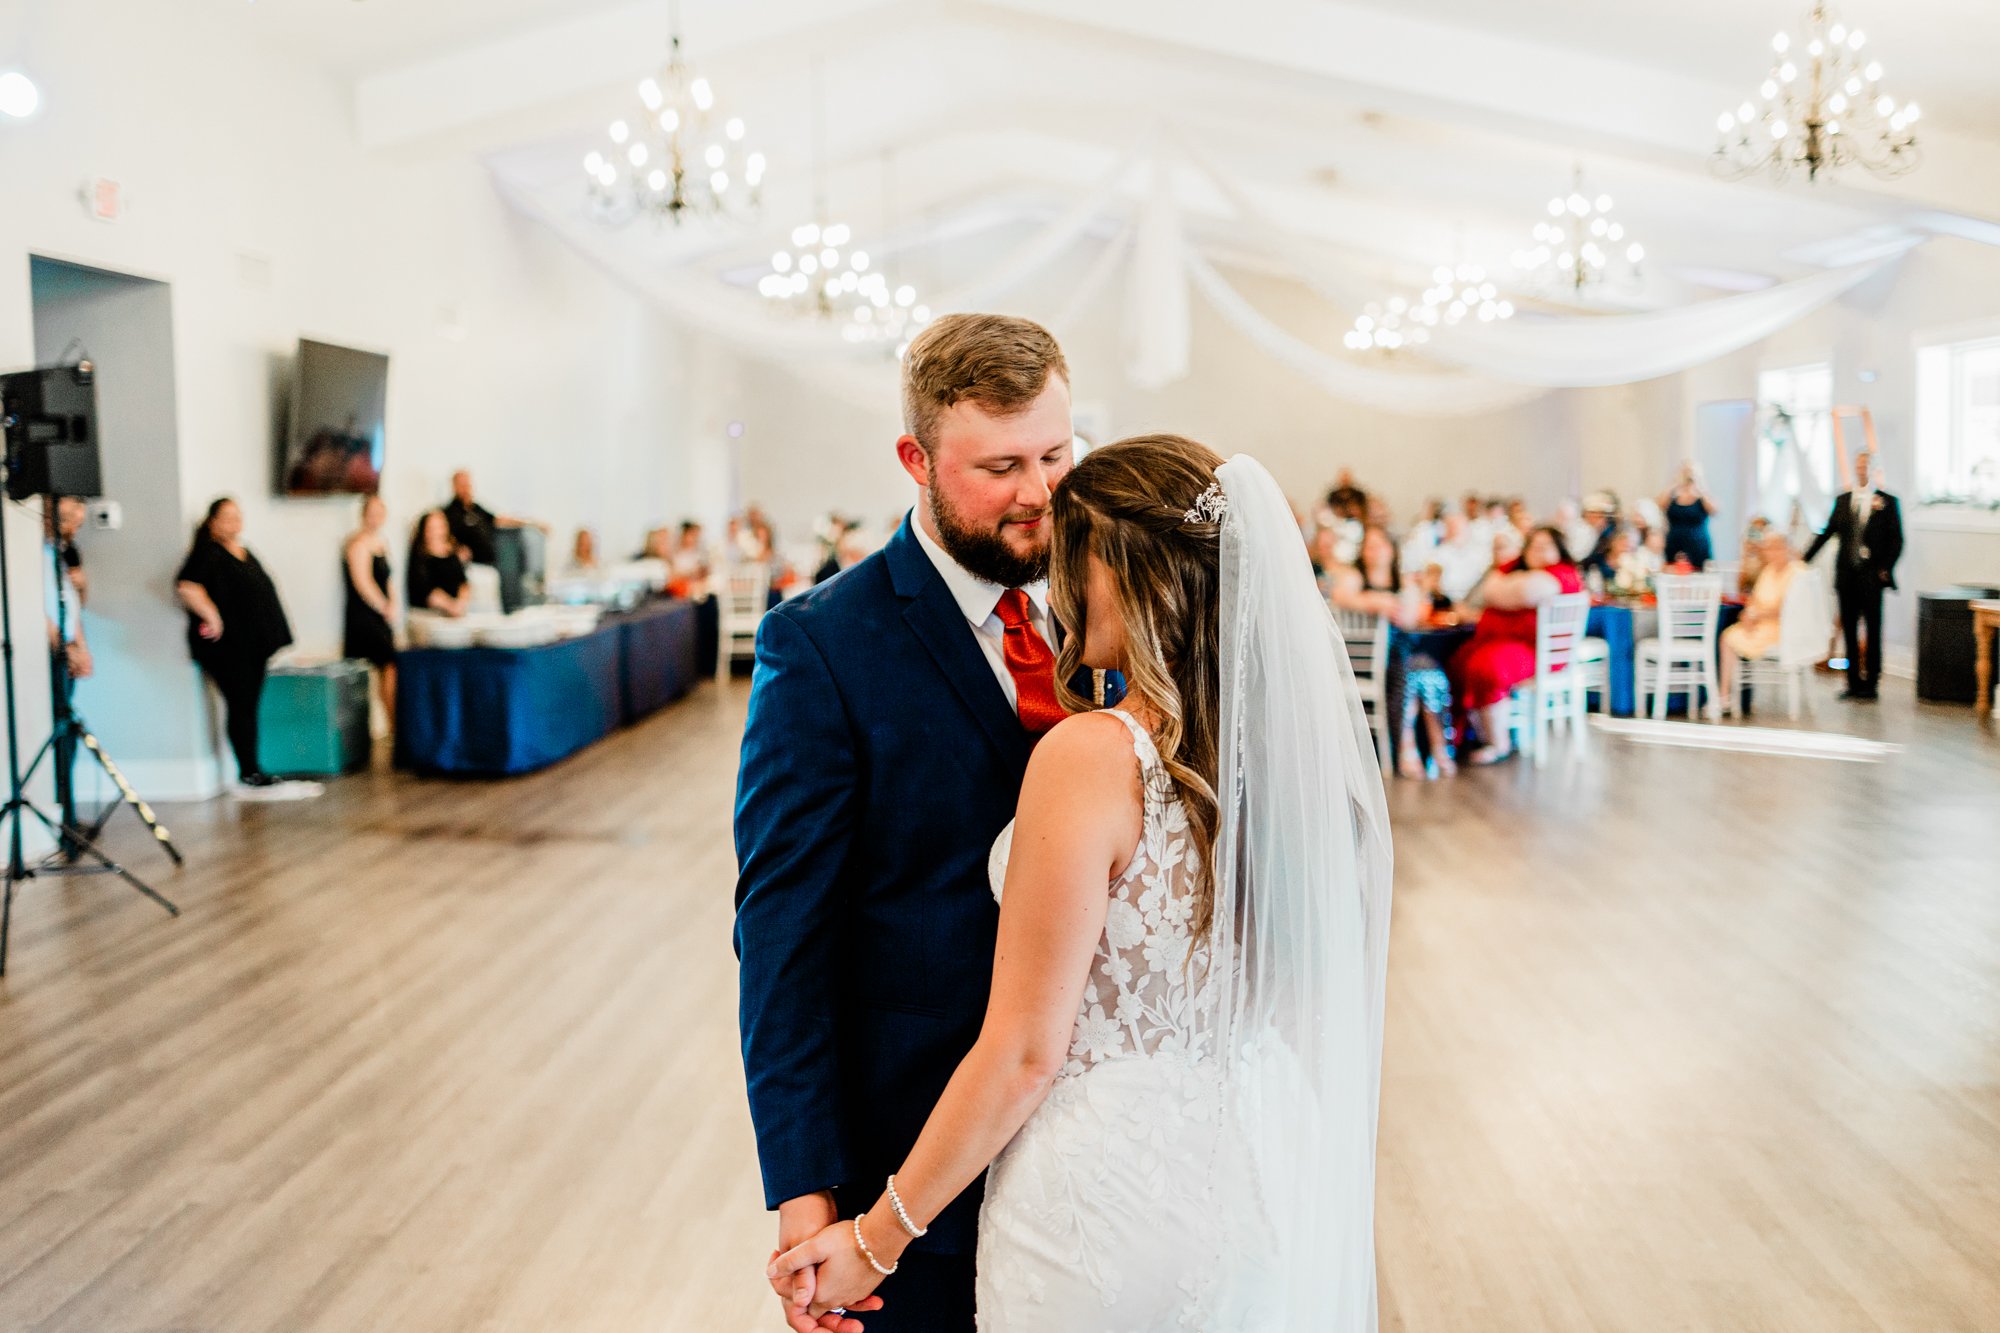 Greenville Sc Weding Day Timeline - first dance and intros-2.jpg